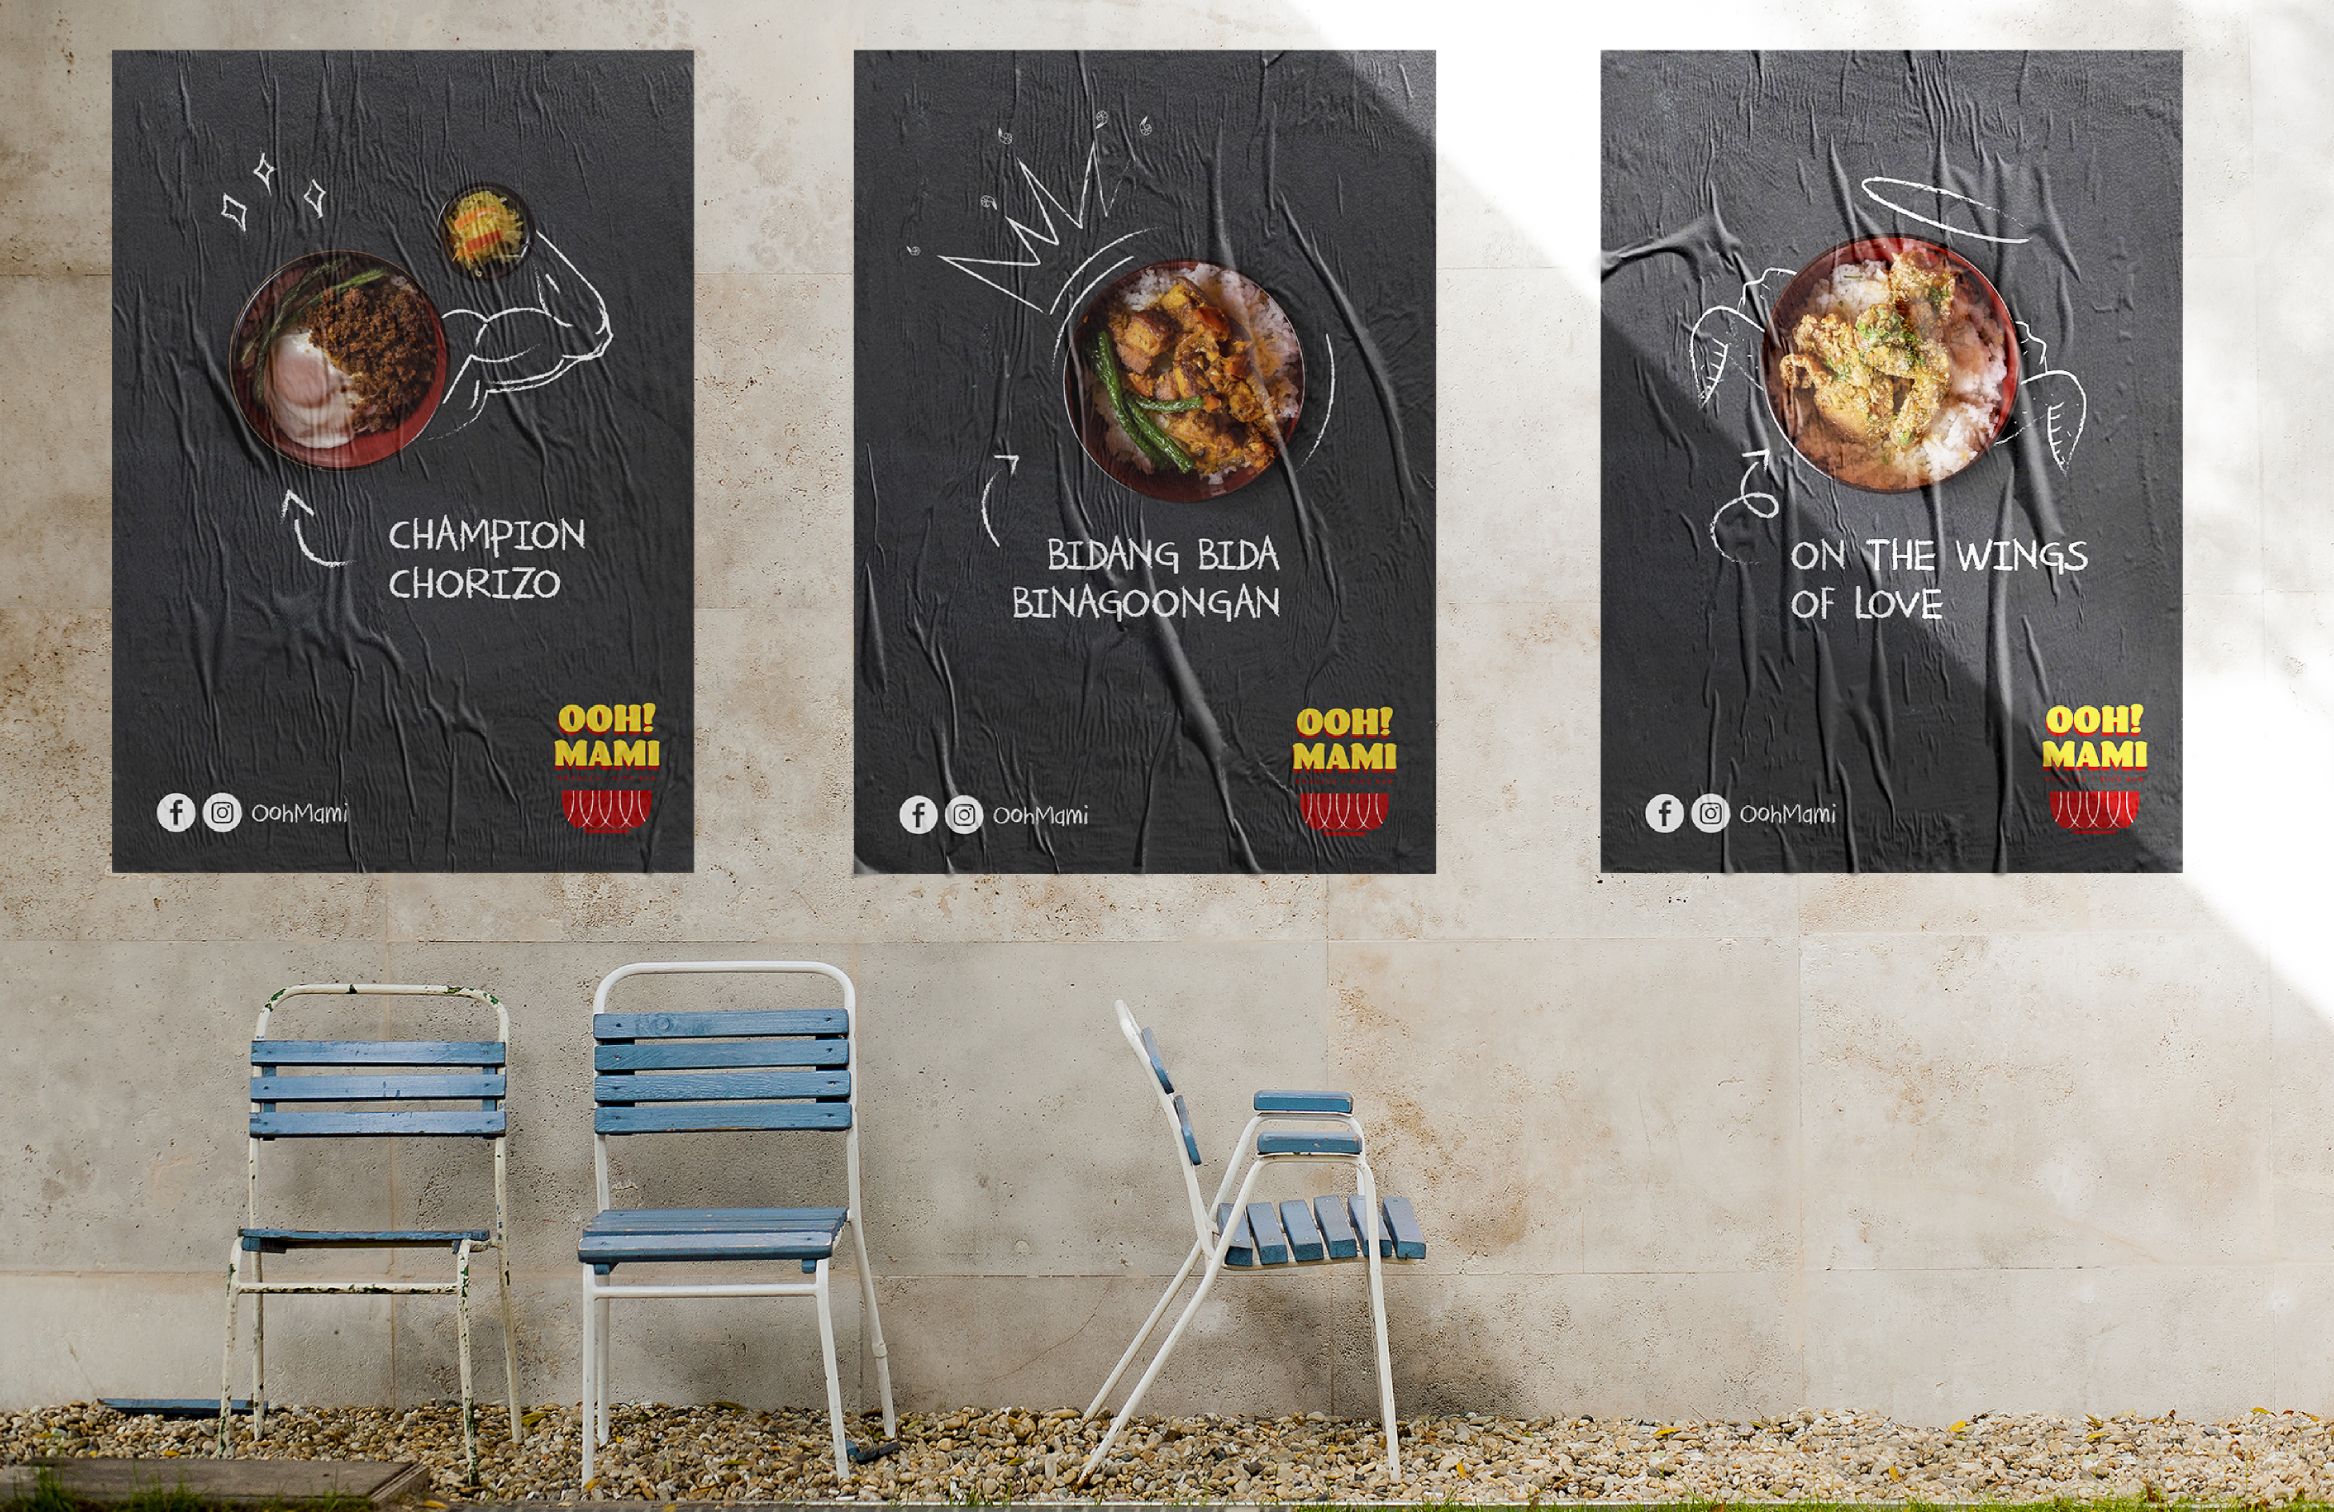 Images of poster design pasted on a wall with 3 chairs